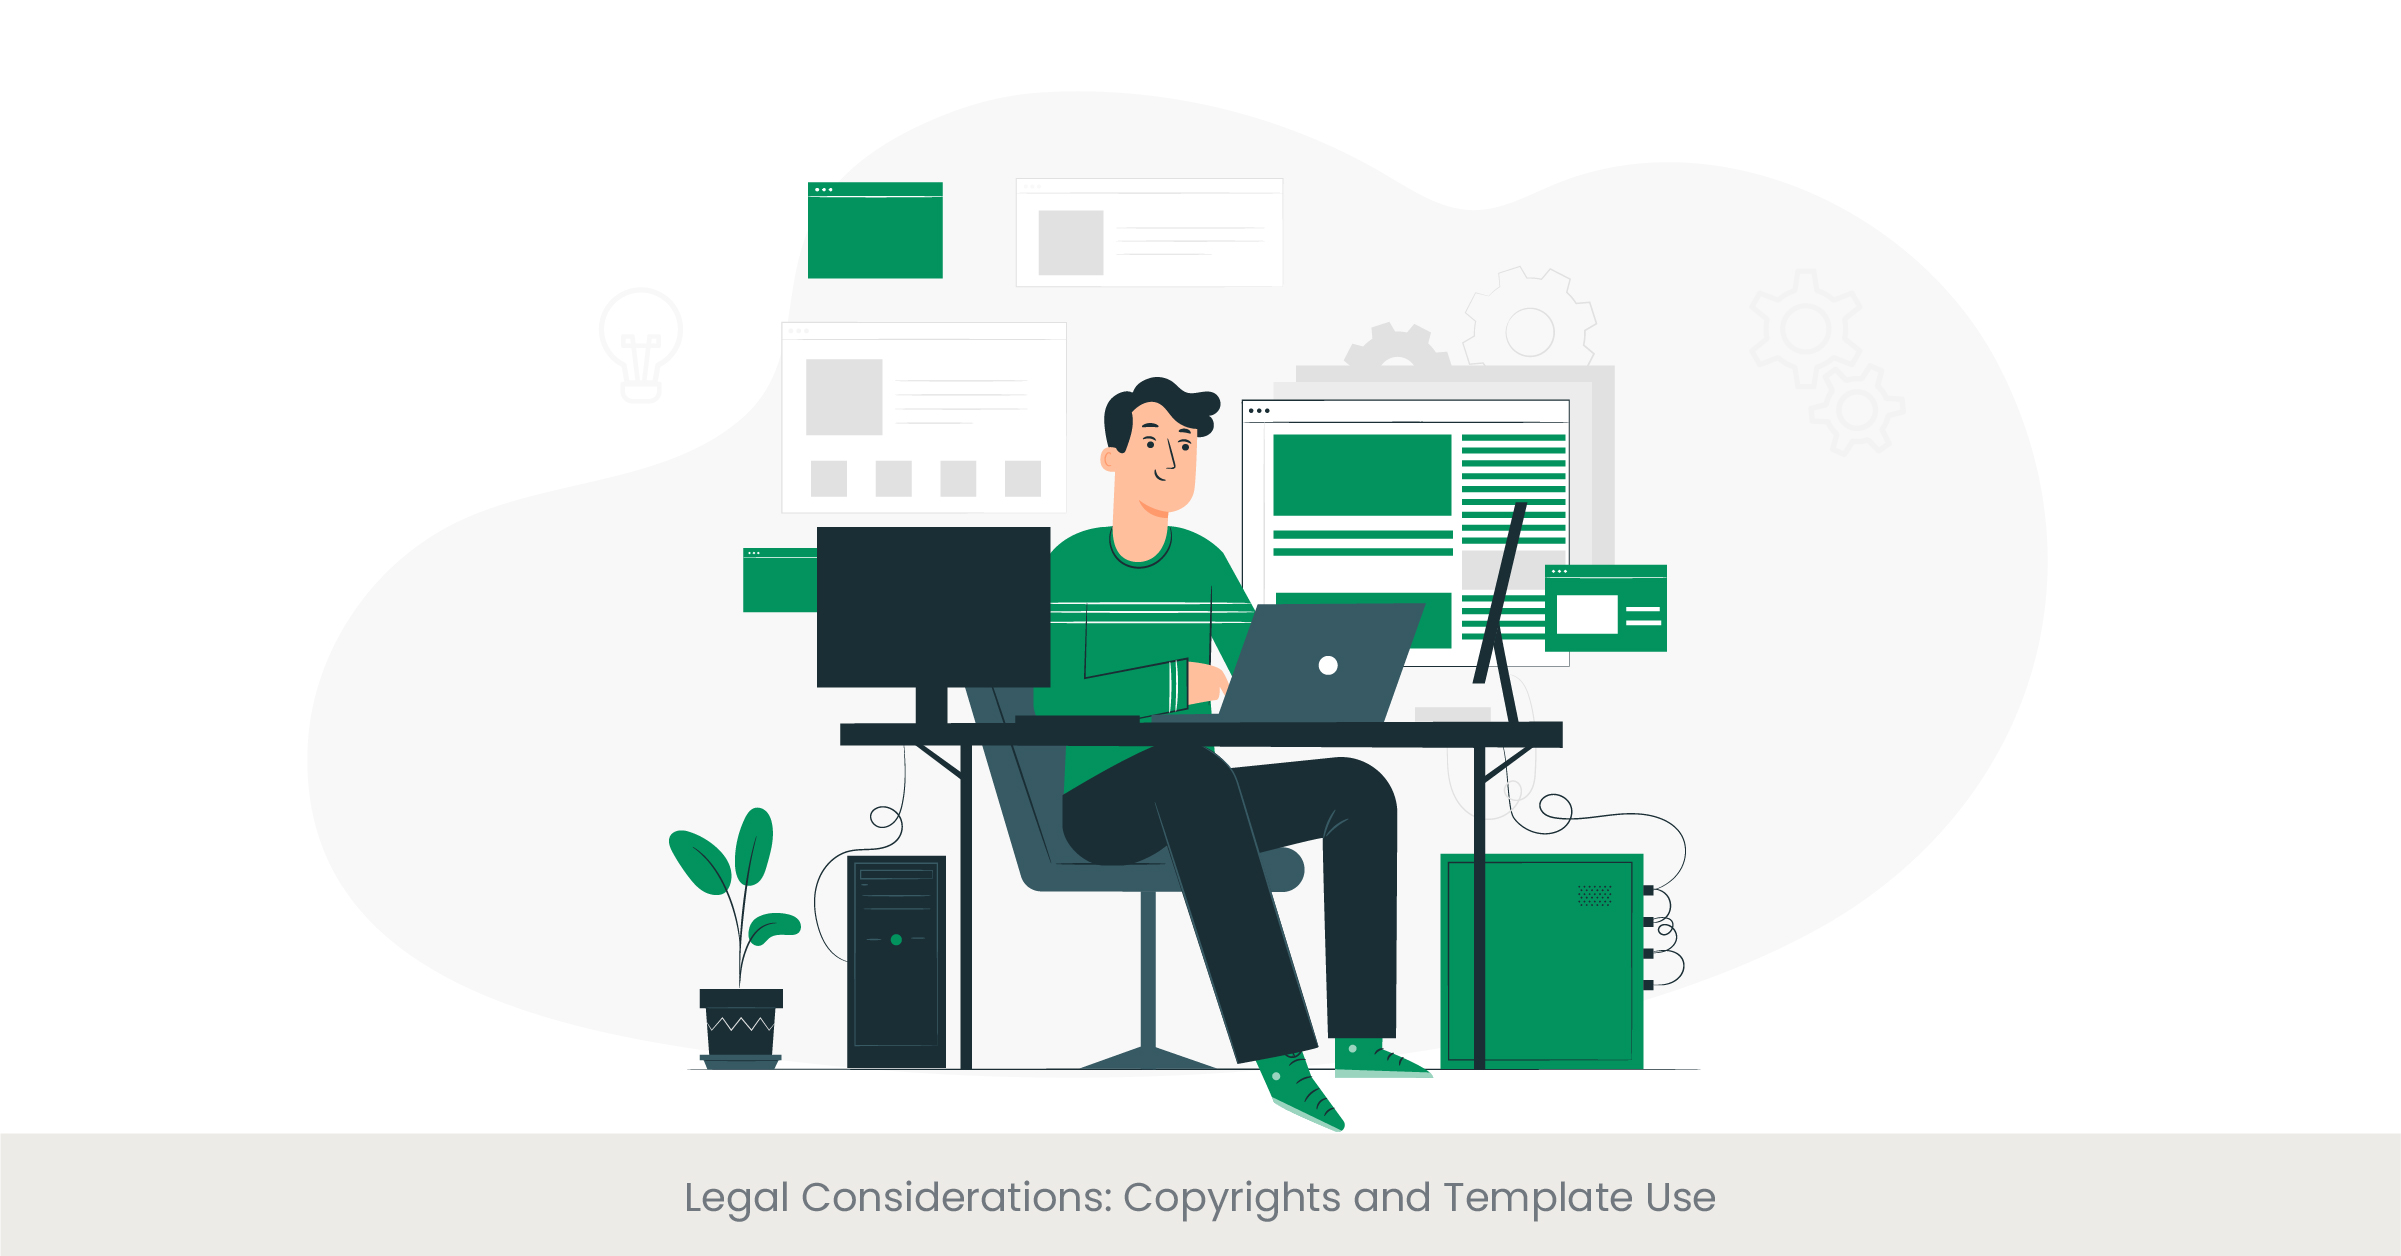 Legal Considerations: Copyrights and Template Use